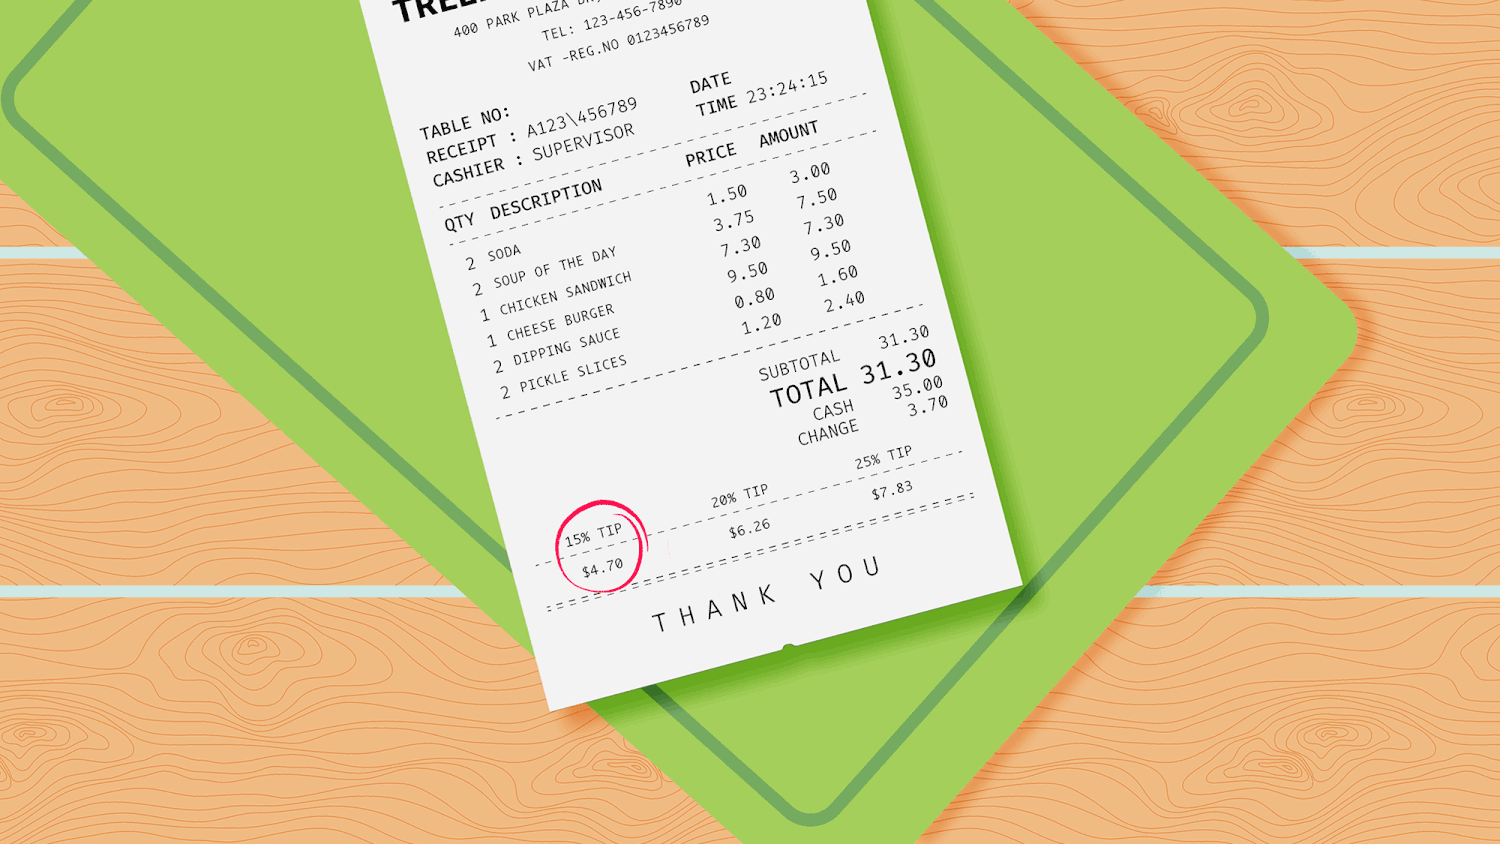 Restaurant receipt with circles over different tip percentages